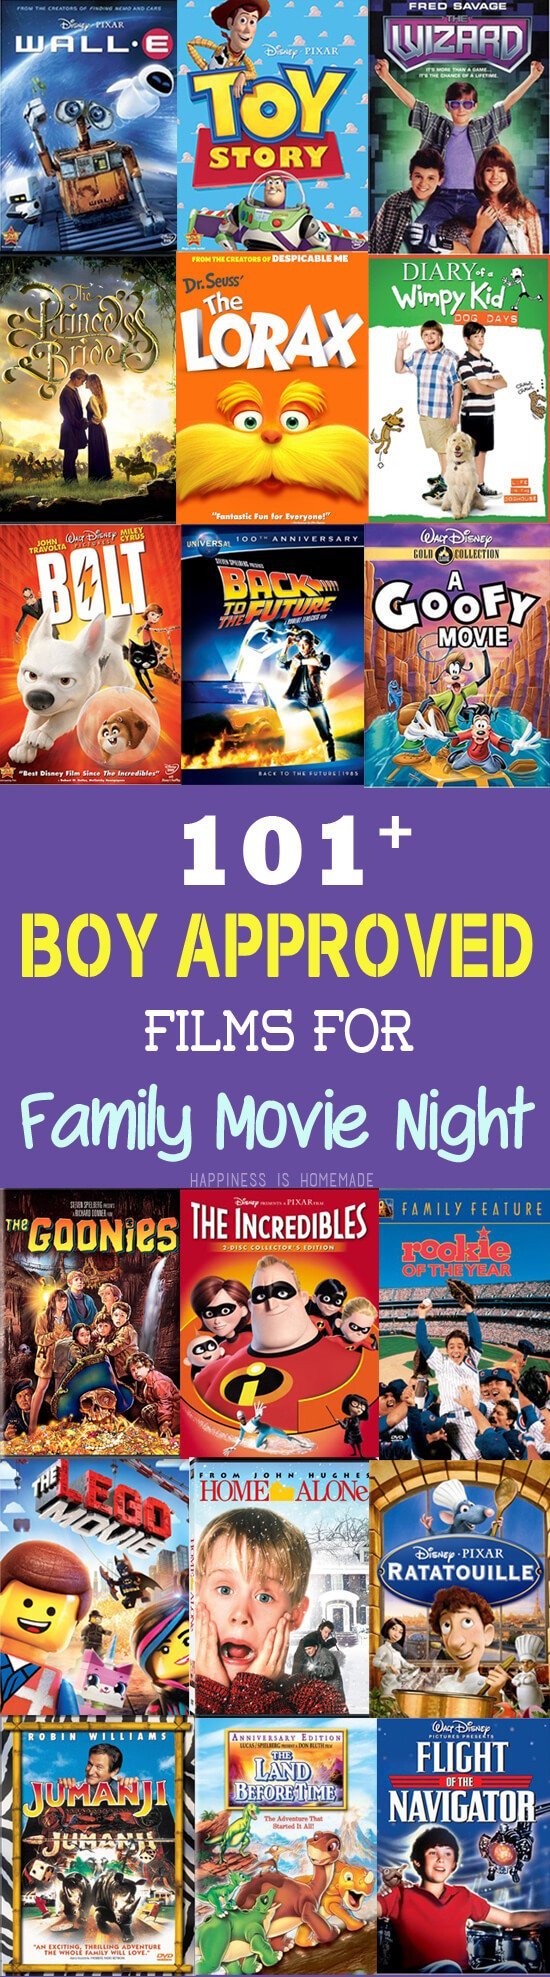 101+ Boy Approved Films for Family Movie Night